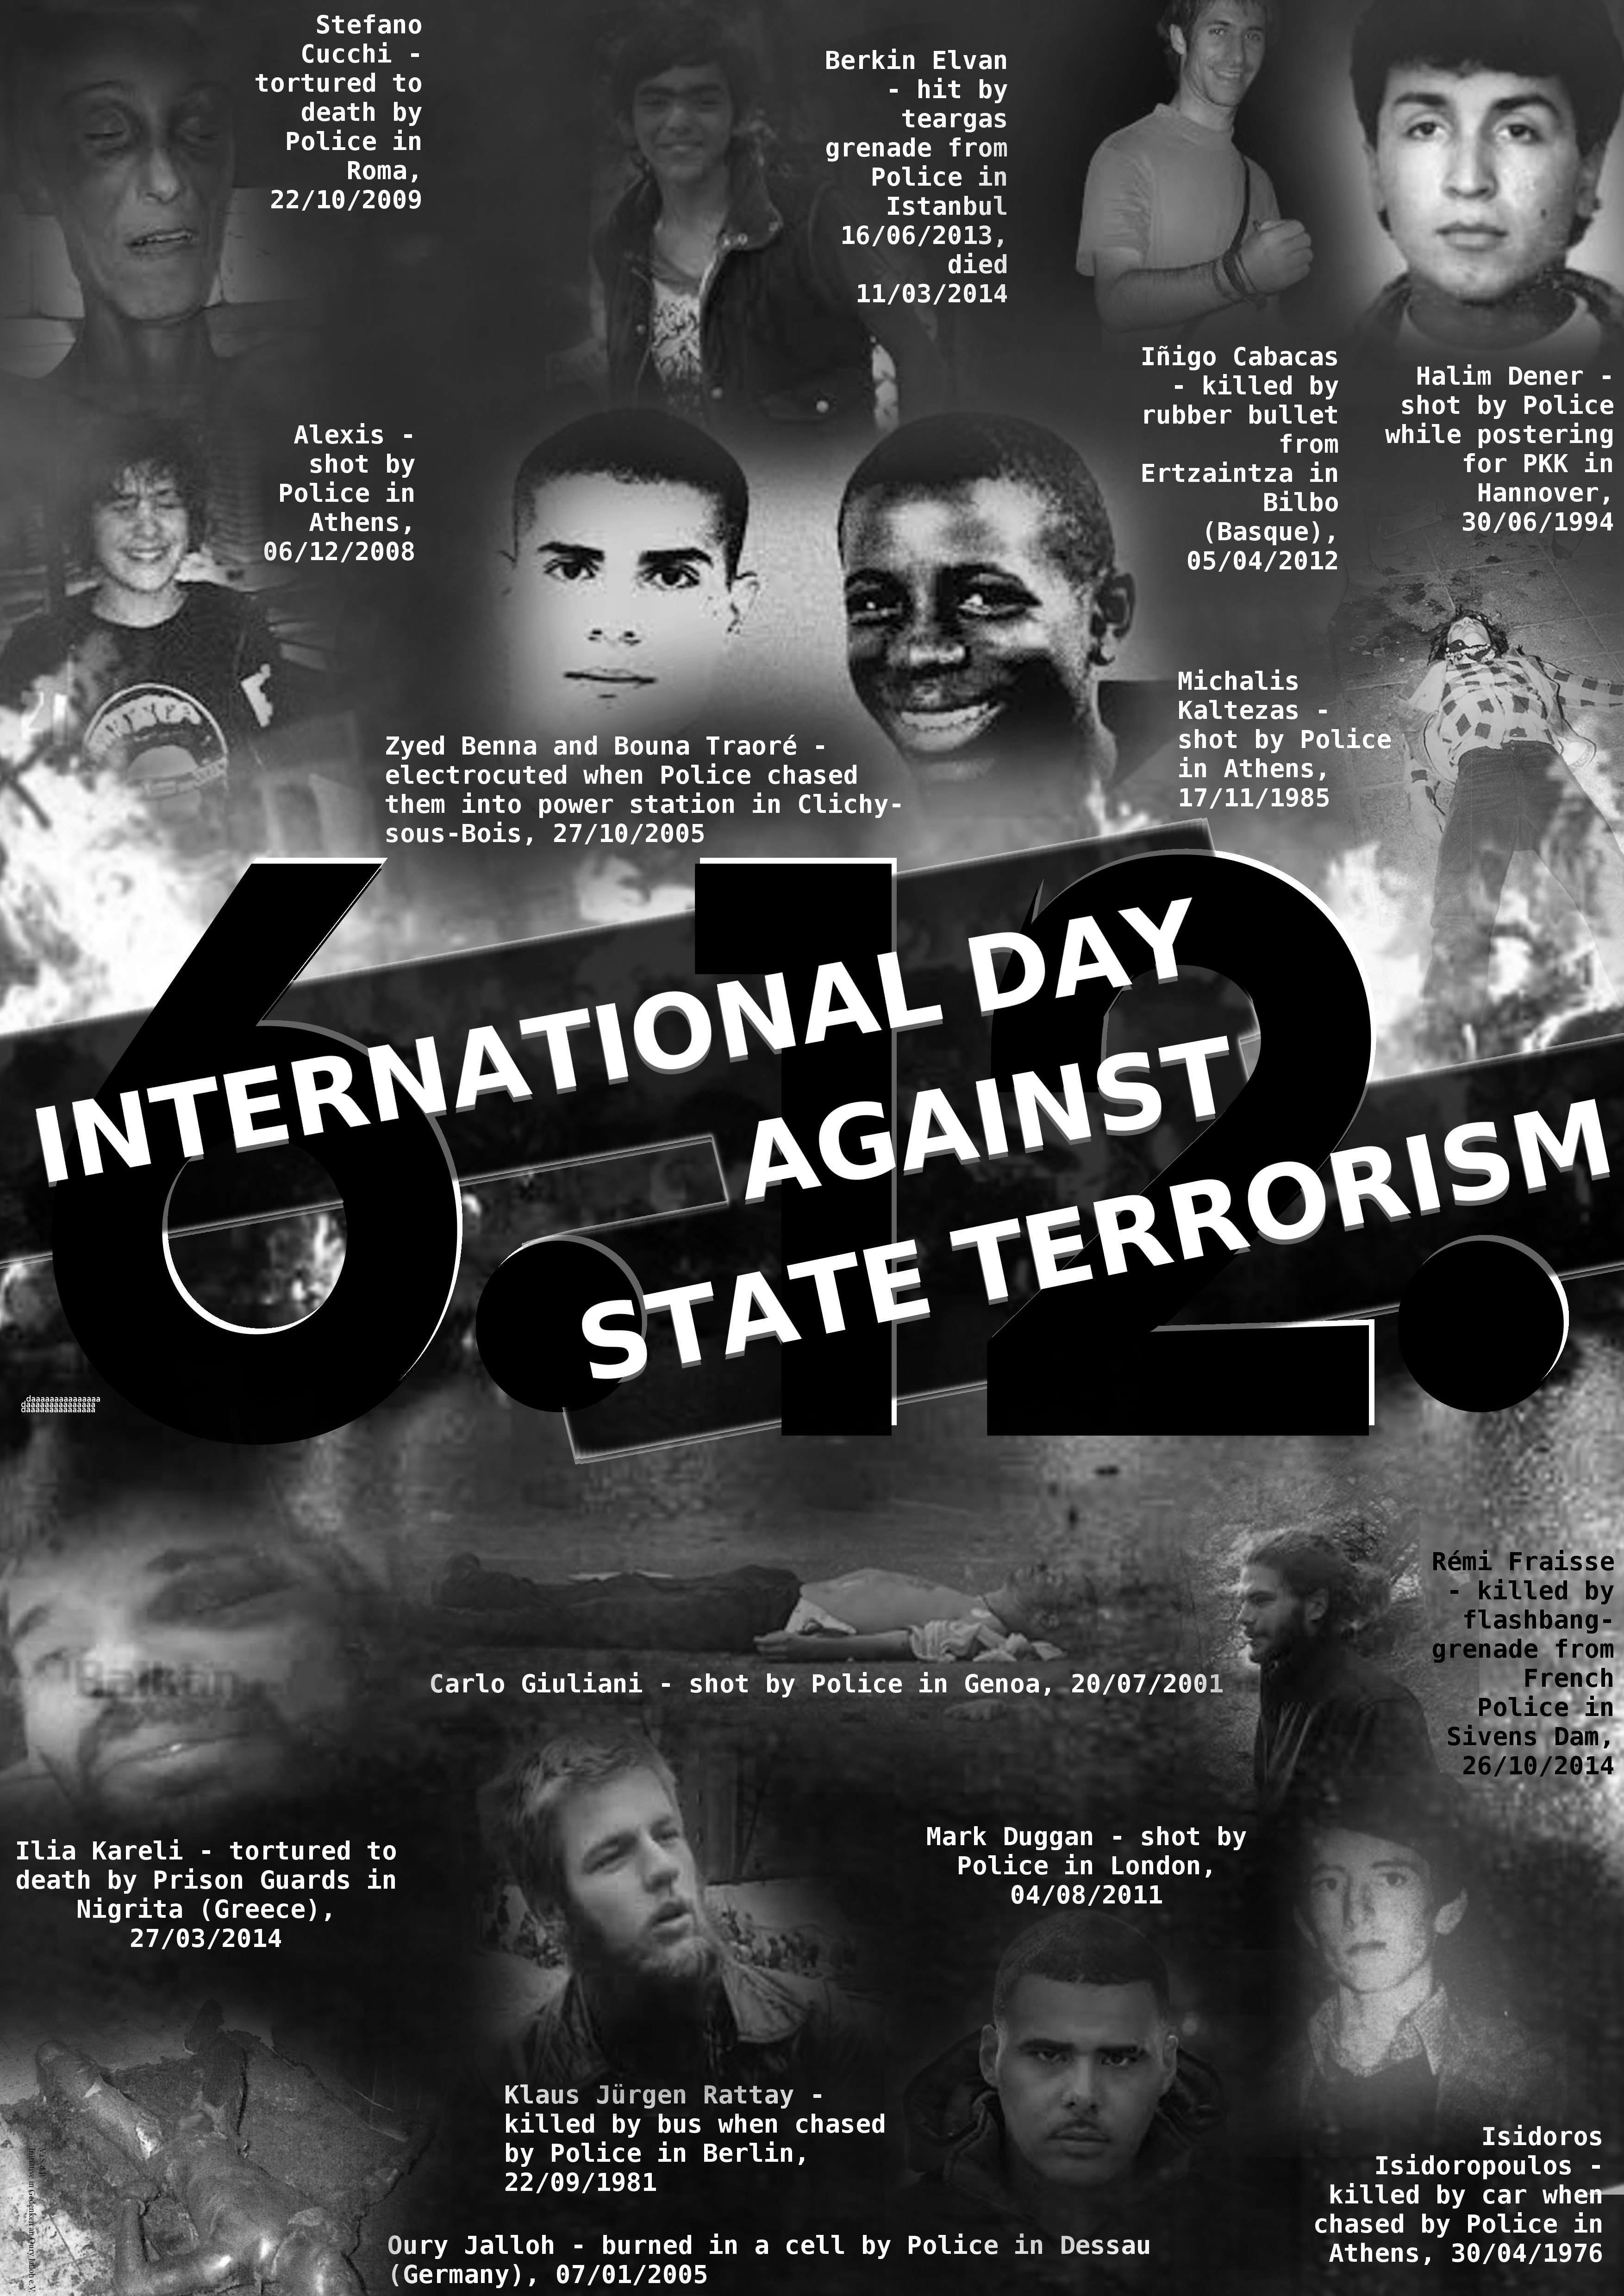 6th of December – International Day Against State Terrorism